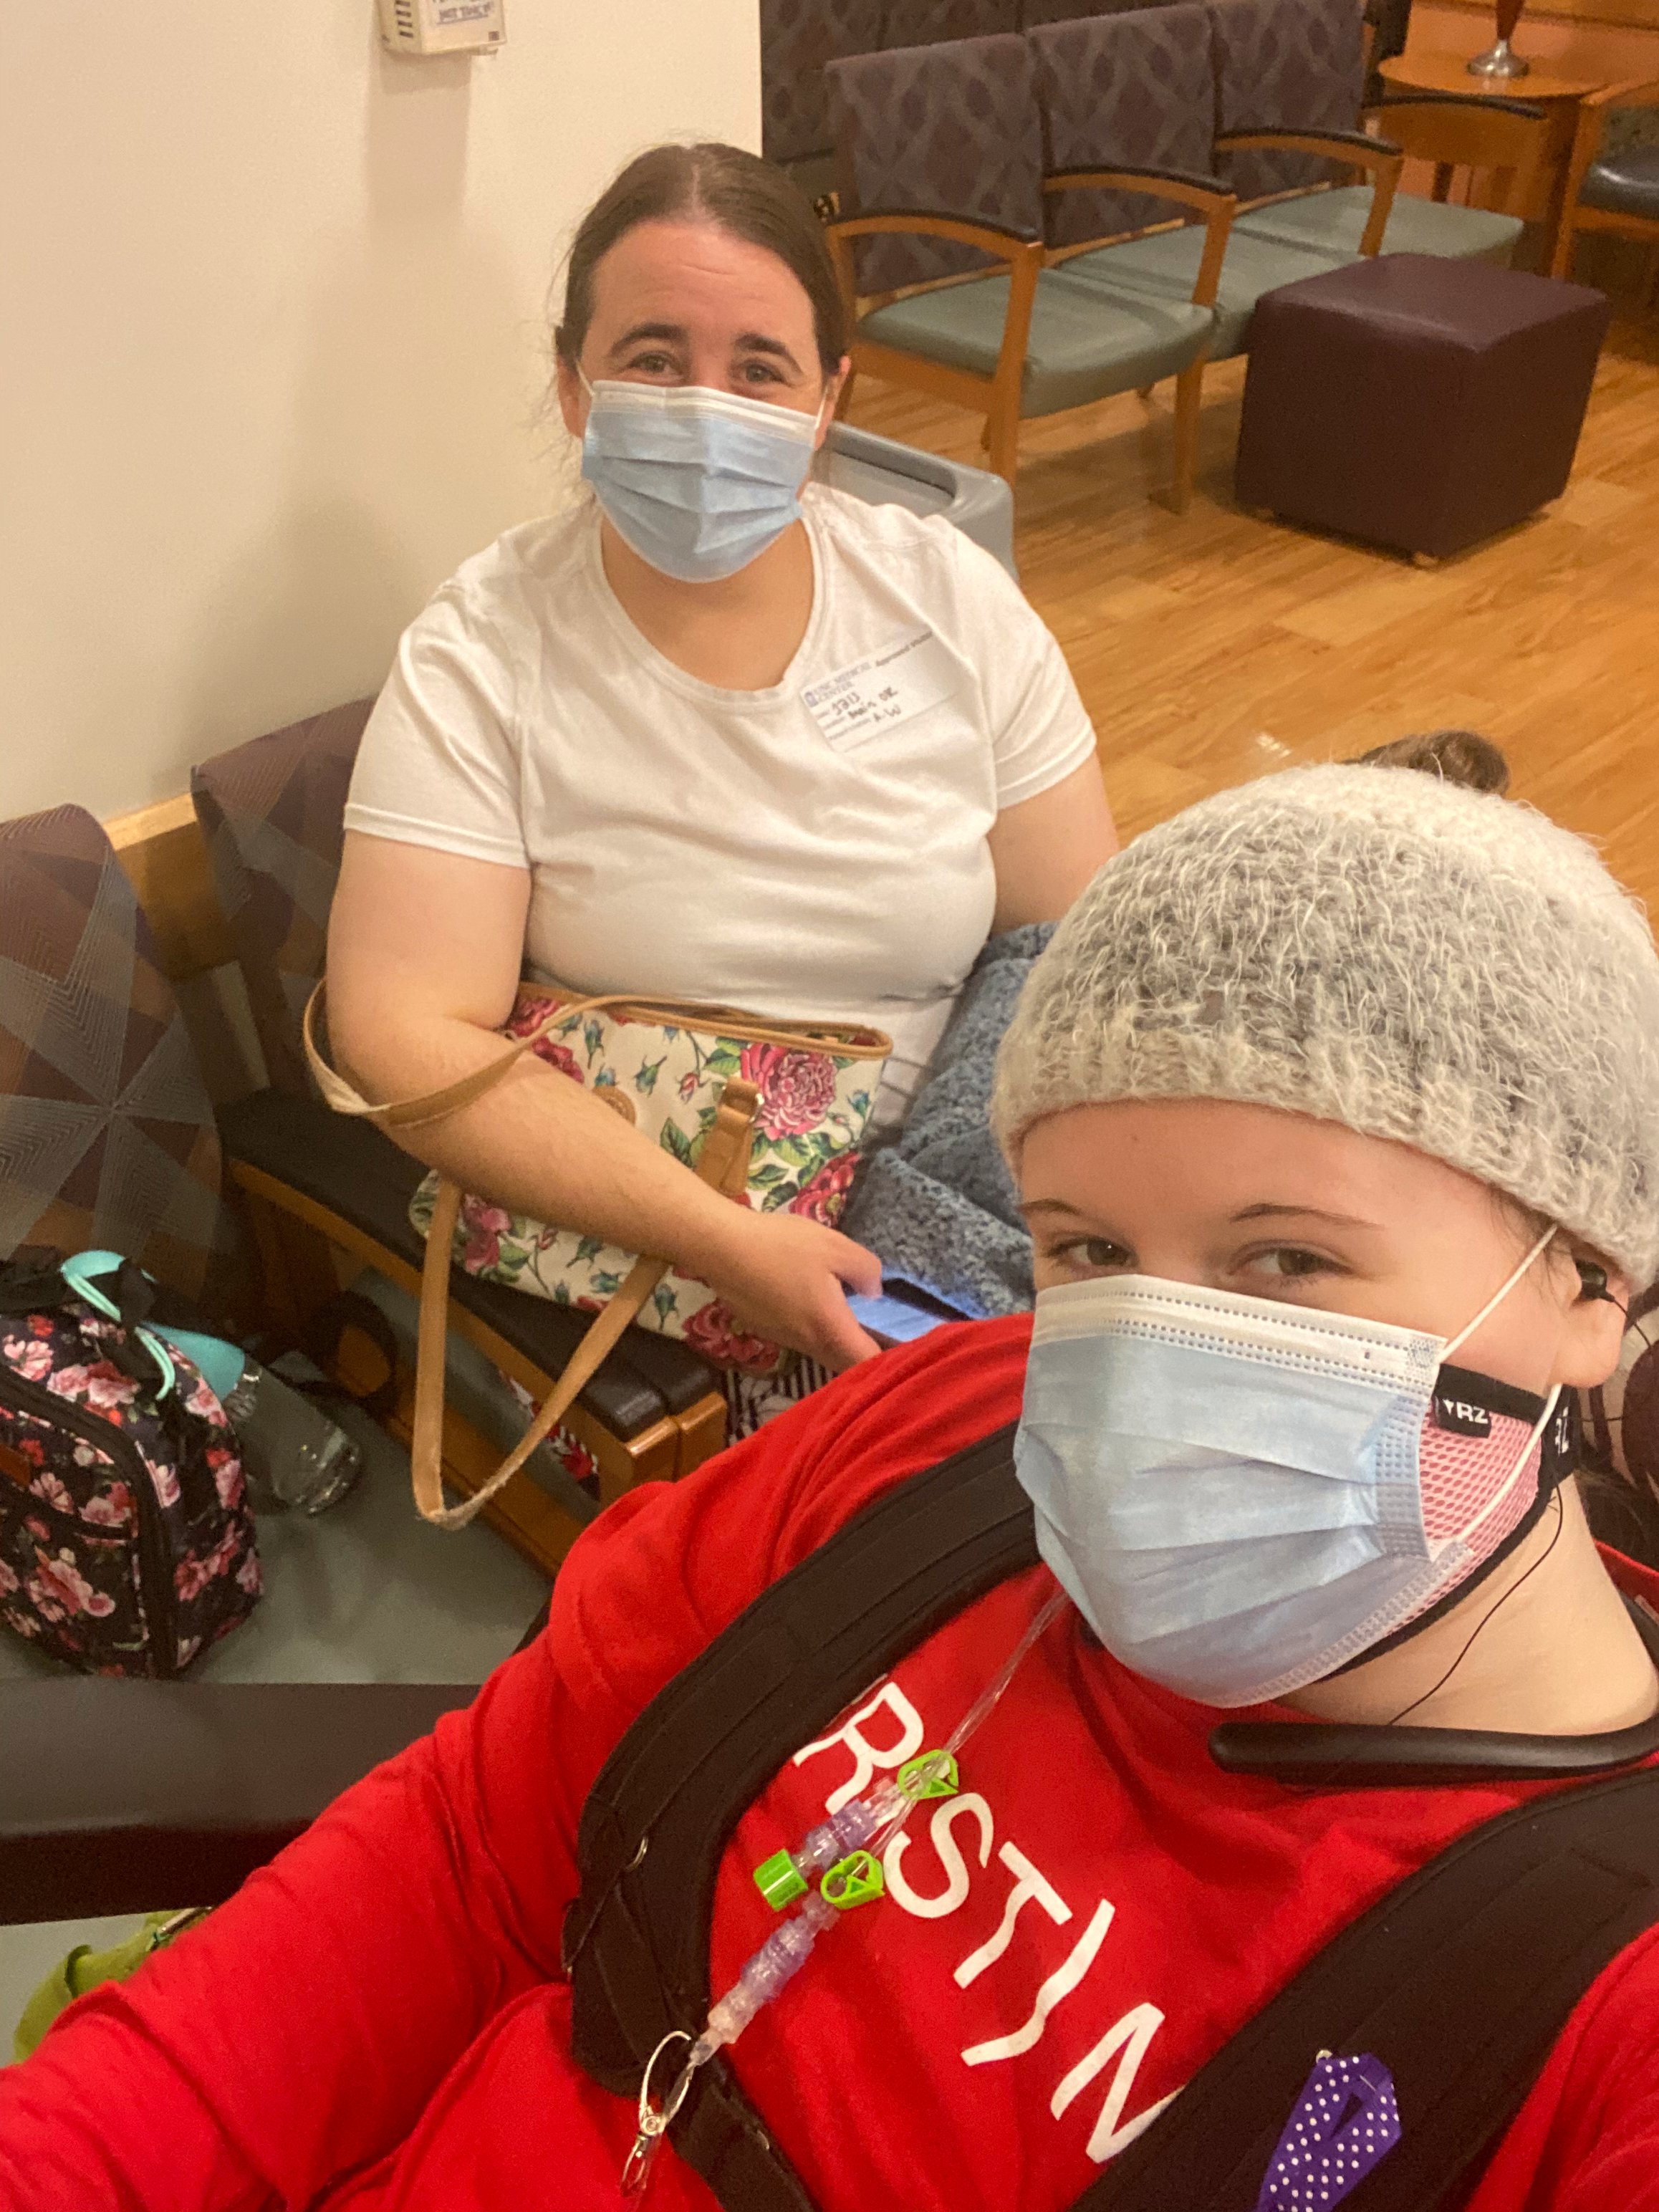 Christina and I waiting to be called back for my oral surgery.